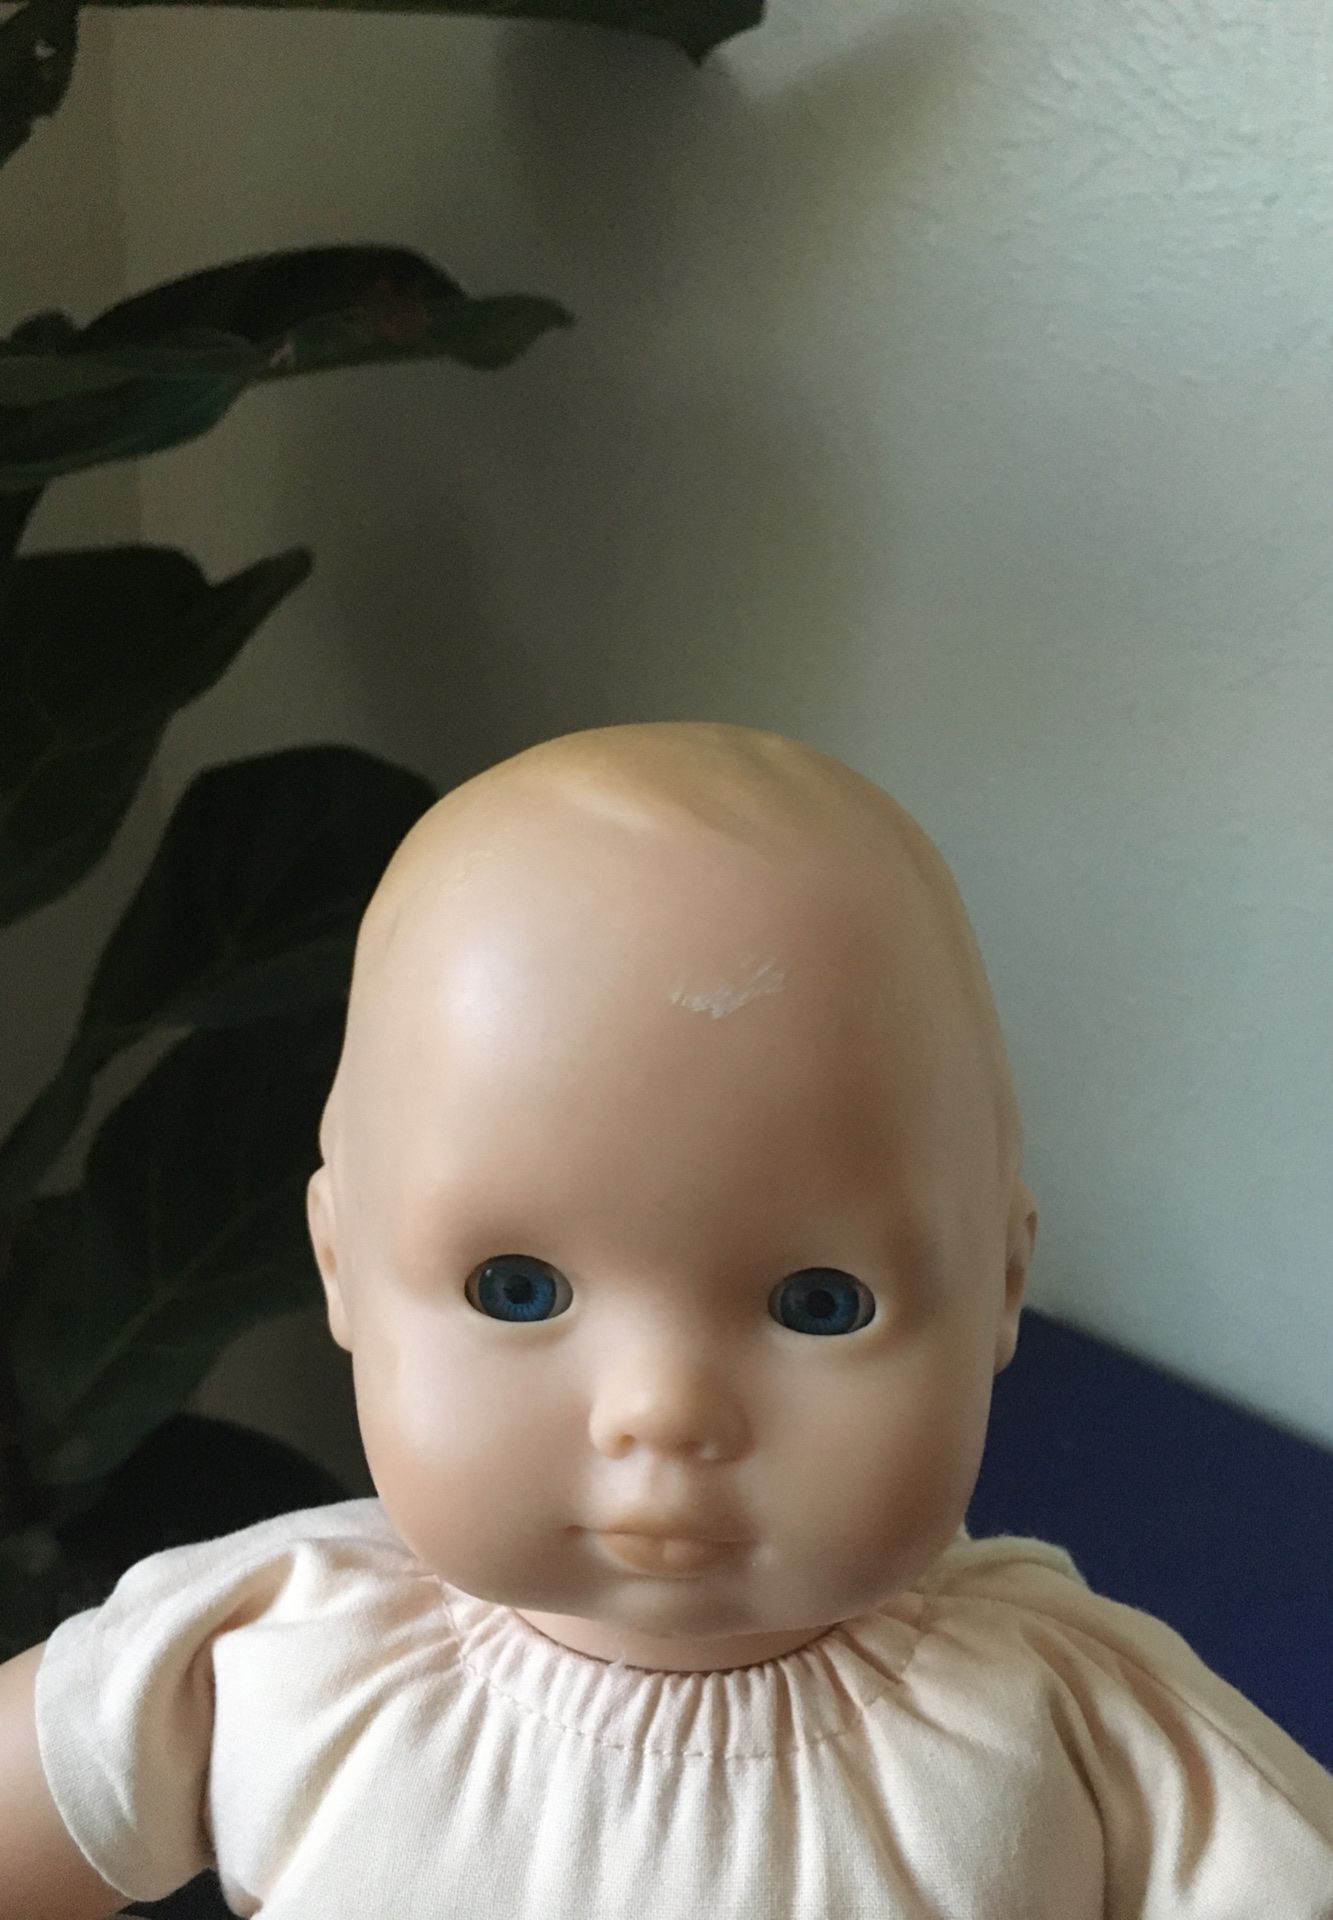 👧🏼American girl bitty baby doll collection. Great condition.